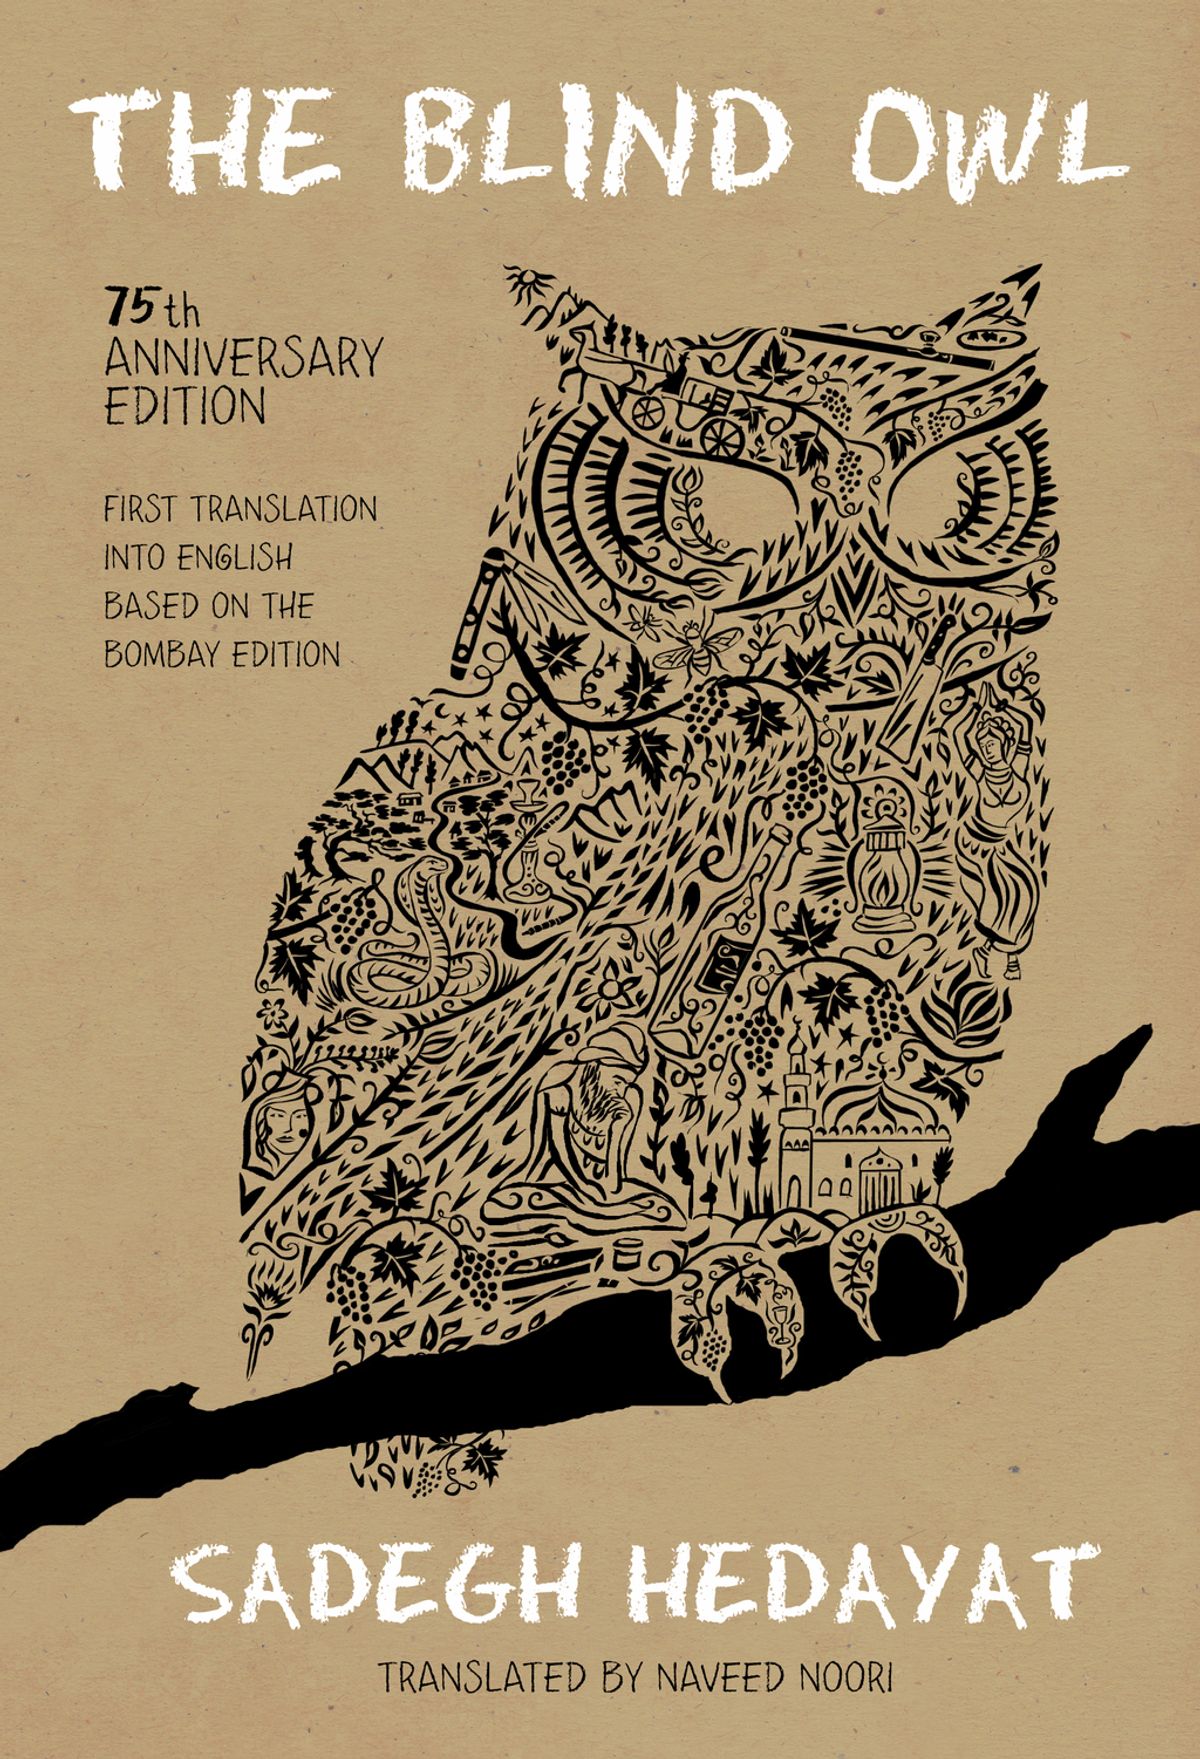 Cover of Sadegh Hedayat's "The Blind Owl", translated into English by Naveed Noori (published by Iran Open Publishing Group; based on Bombay edition) 